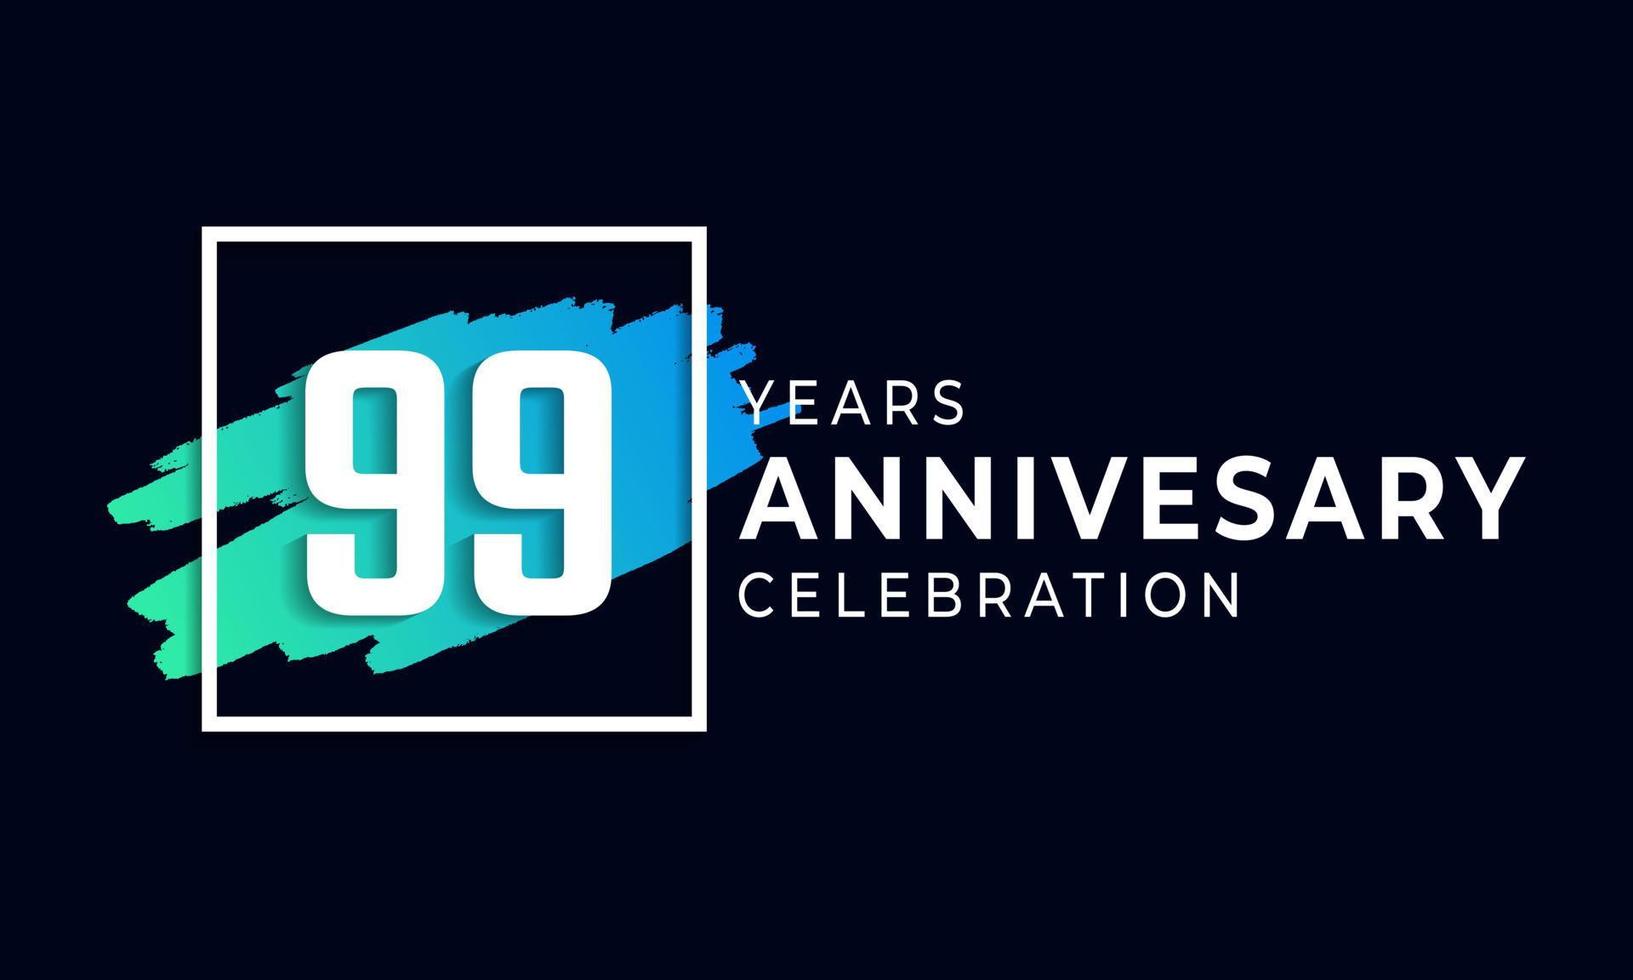 99 Year Anniversary Celebration with Blue Brush and Square Symbol. Happy Anniversary Greeting Celebrates Event Isolated on Black Background vector